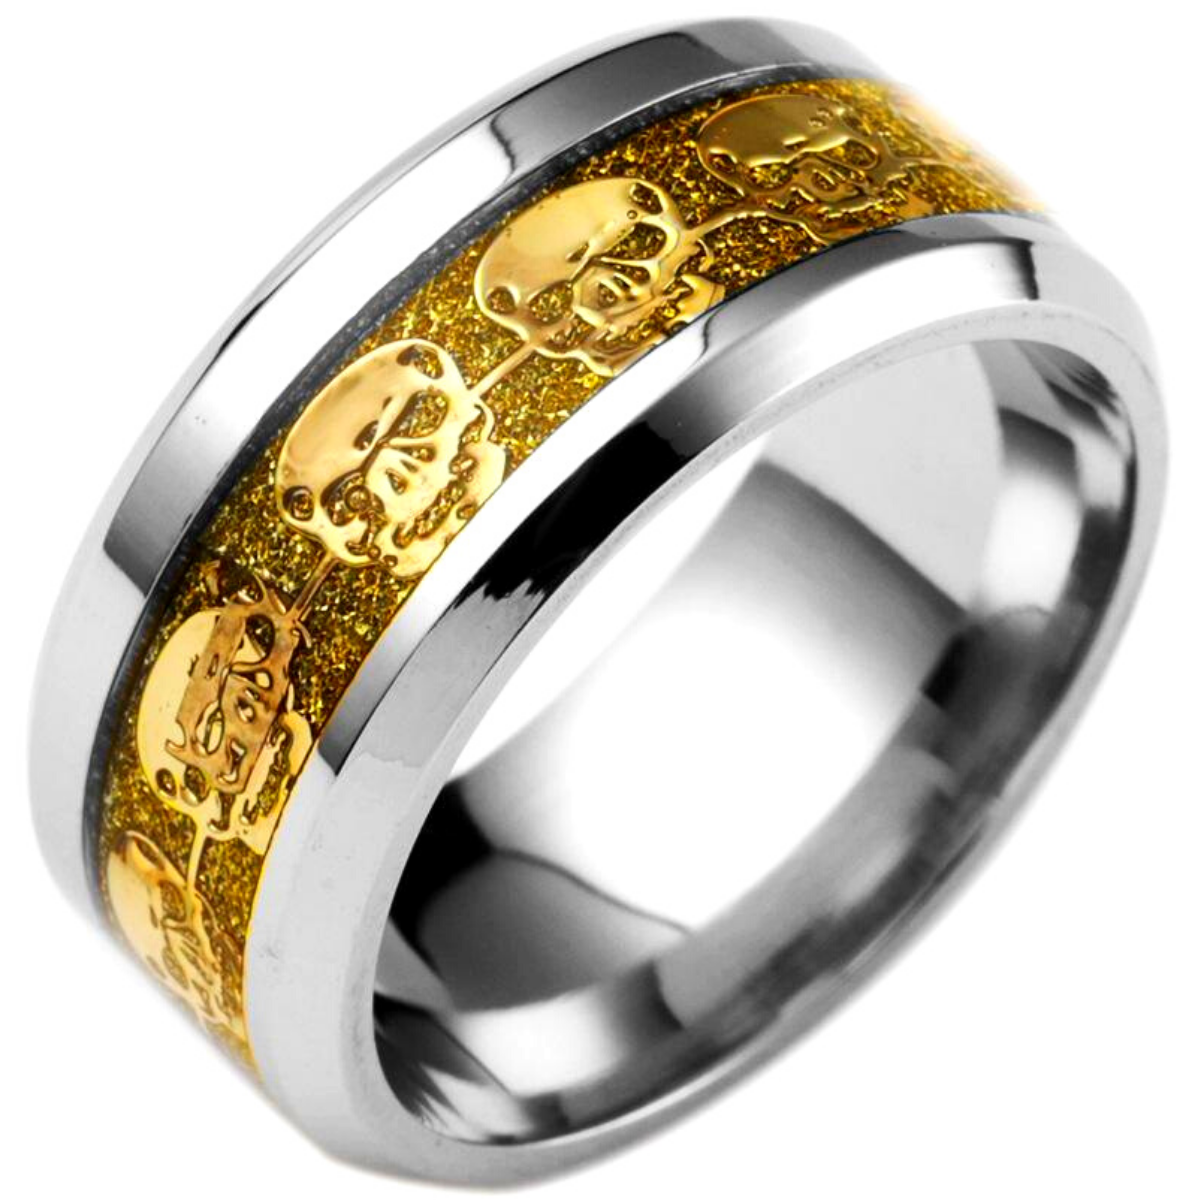 Skull Band Ring Stainless Steel, 0.3 in/8 mm, w/ Yellow Gold Color Skulls Eternity Inlay, Silver/Gold - American Legend Rider